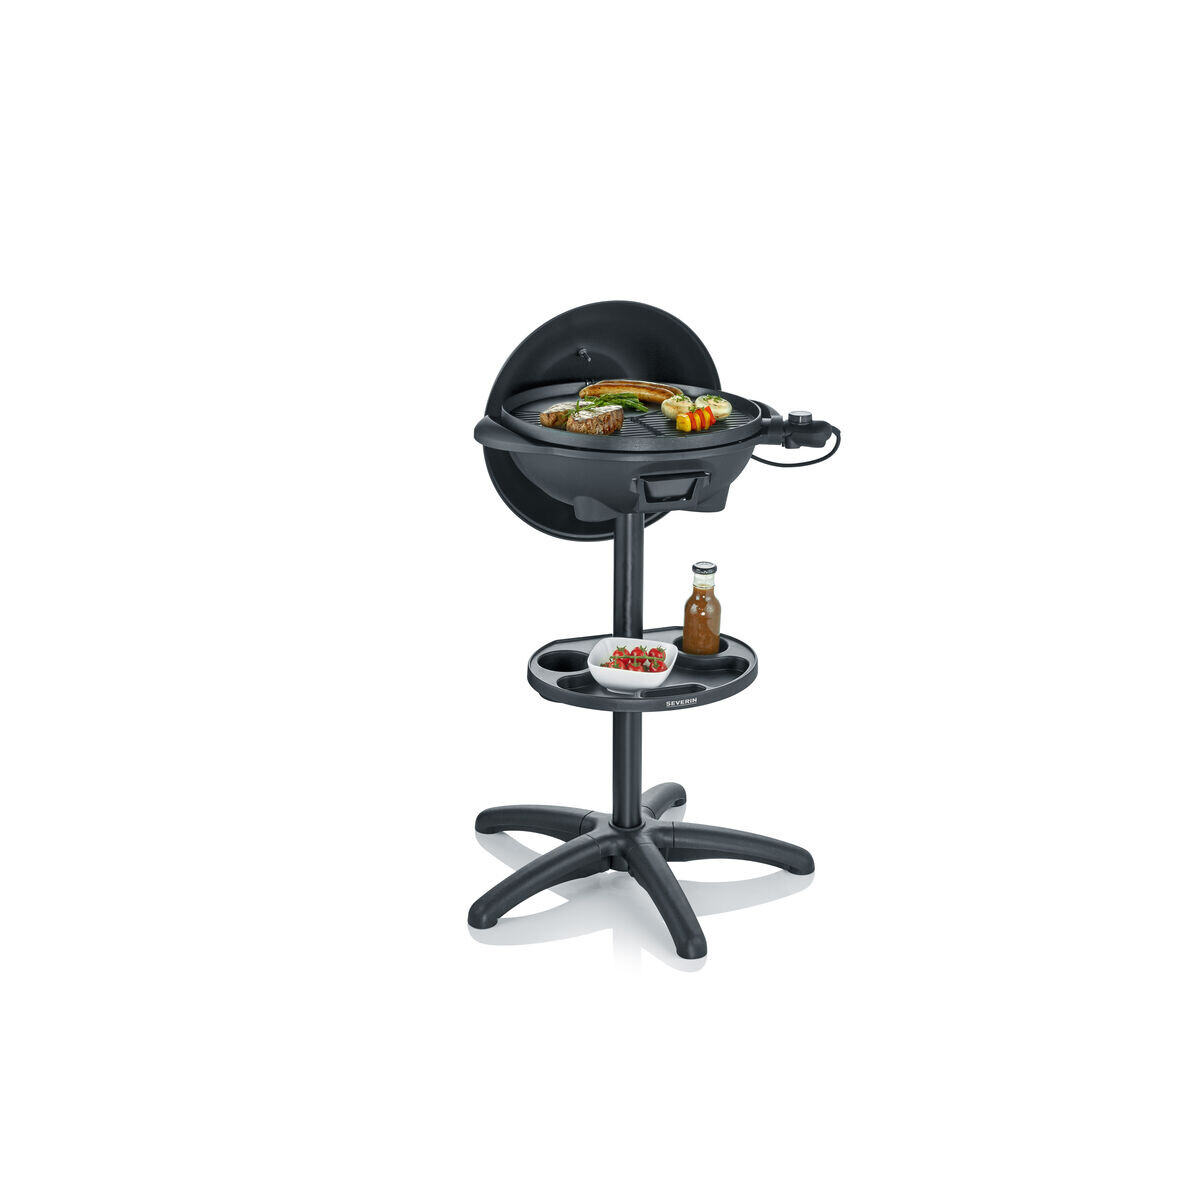 SEVERIN PG 8541 Barbecue-/Standgrill (2.000W,...